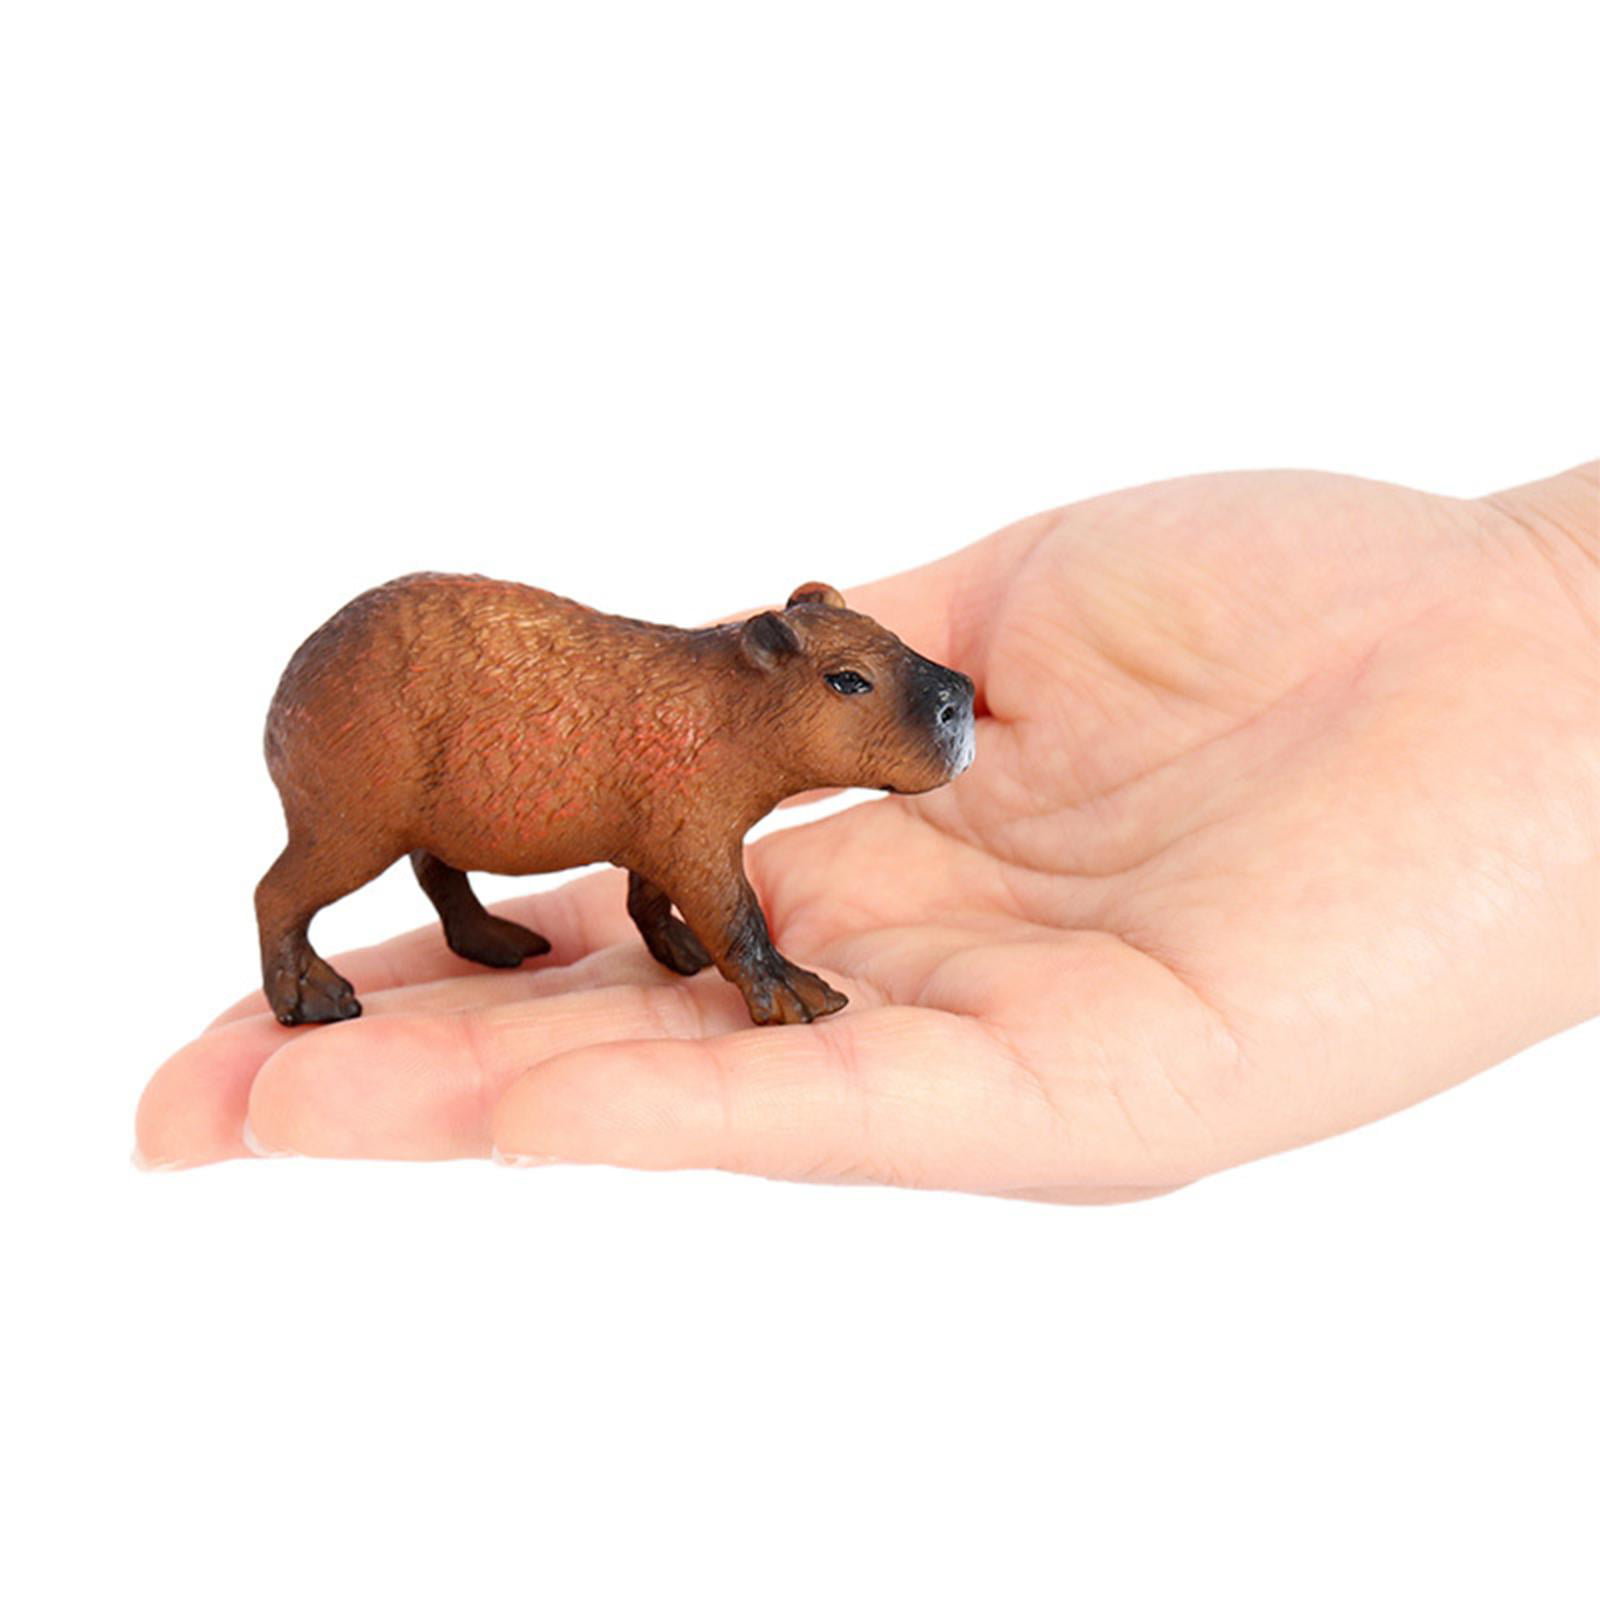 Simulated Animal Model Cognitive Playset Capybara Statue Capybara Figurines  Model for Children Sand Table Desktop Ornament Party Toy Diorama Style A